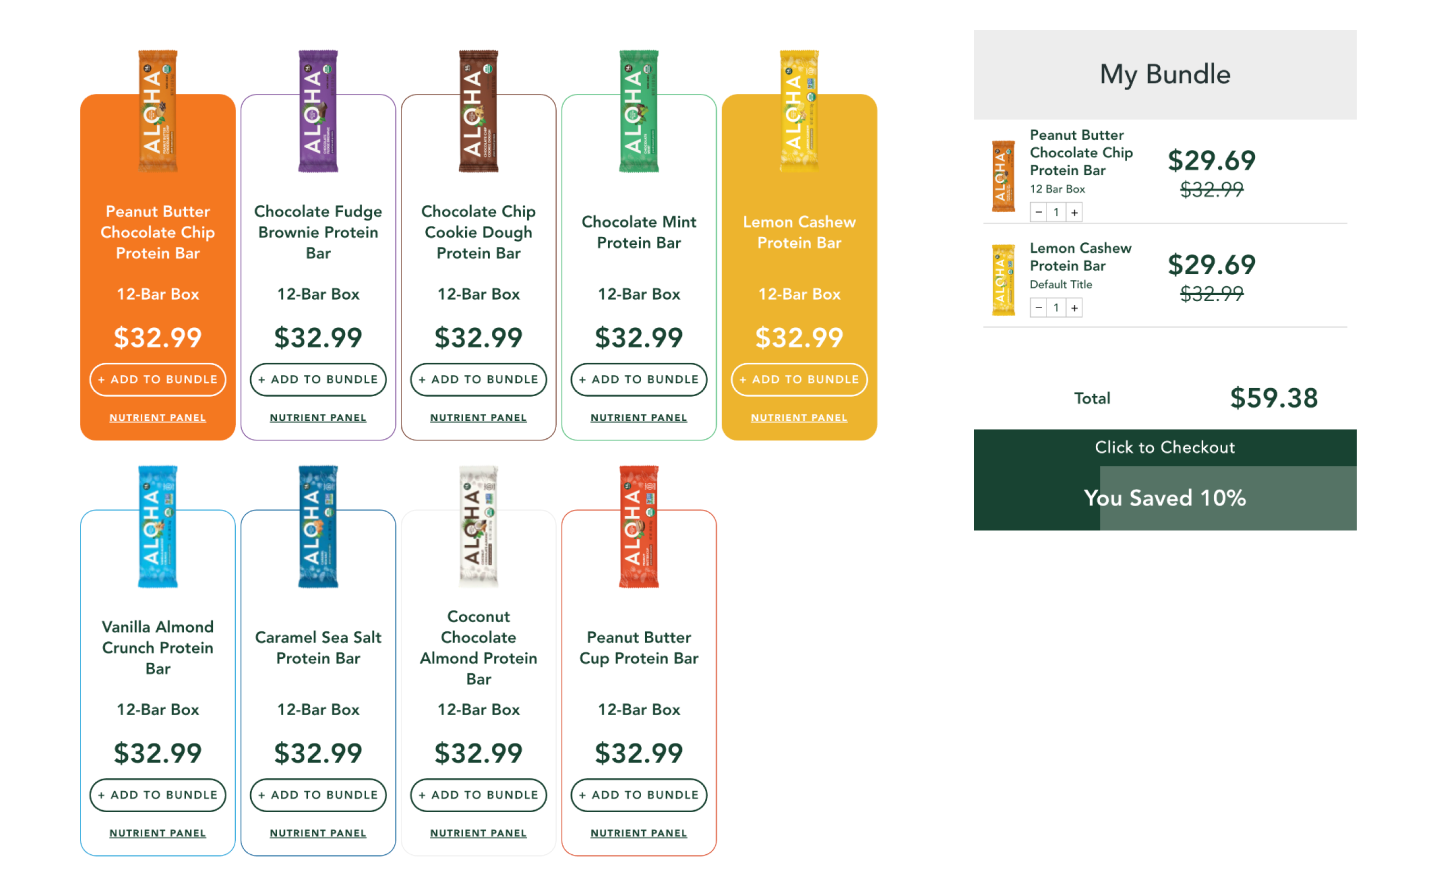 Aloha used Replo to enable customers to build their own bundles which then helps inform which combinations are popular